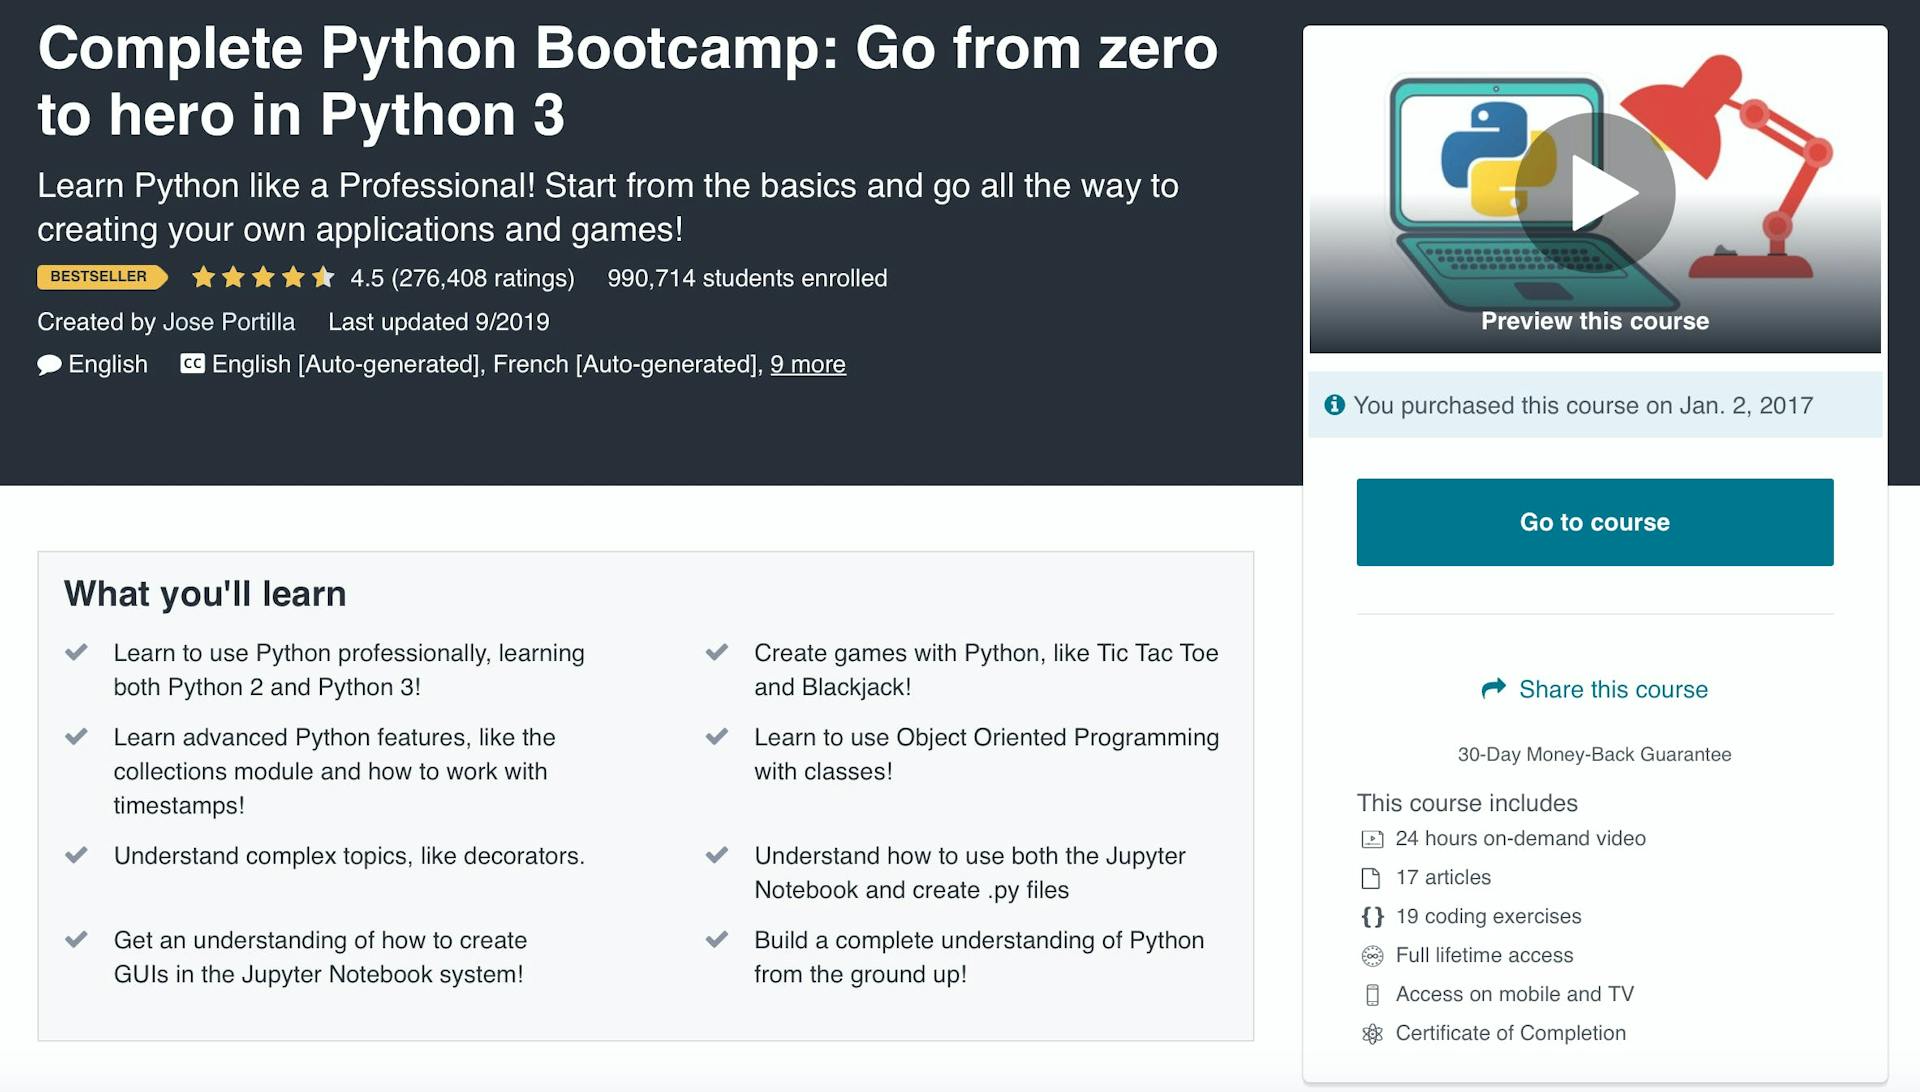 Complete Python Bootcamp: Go from zero to hero in Python 3